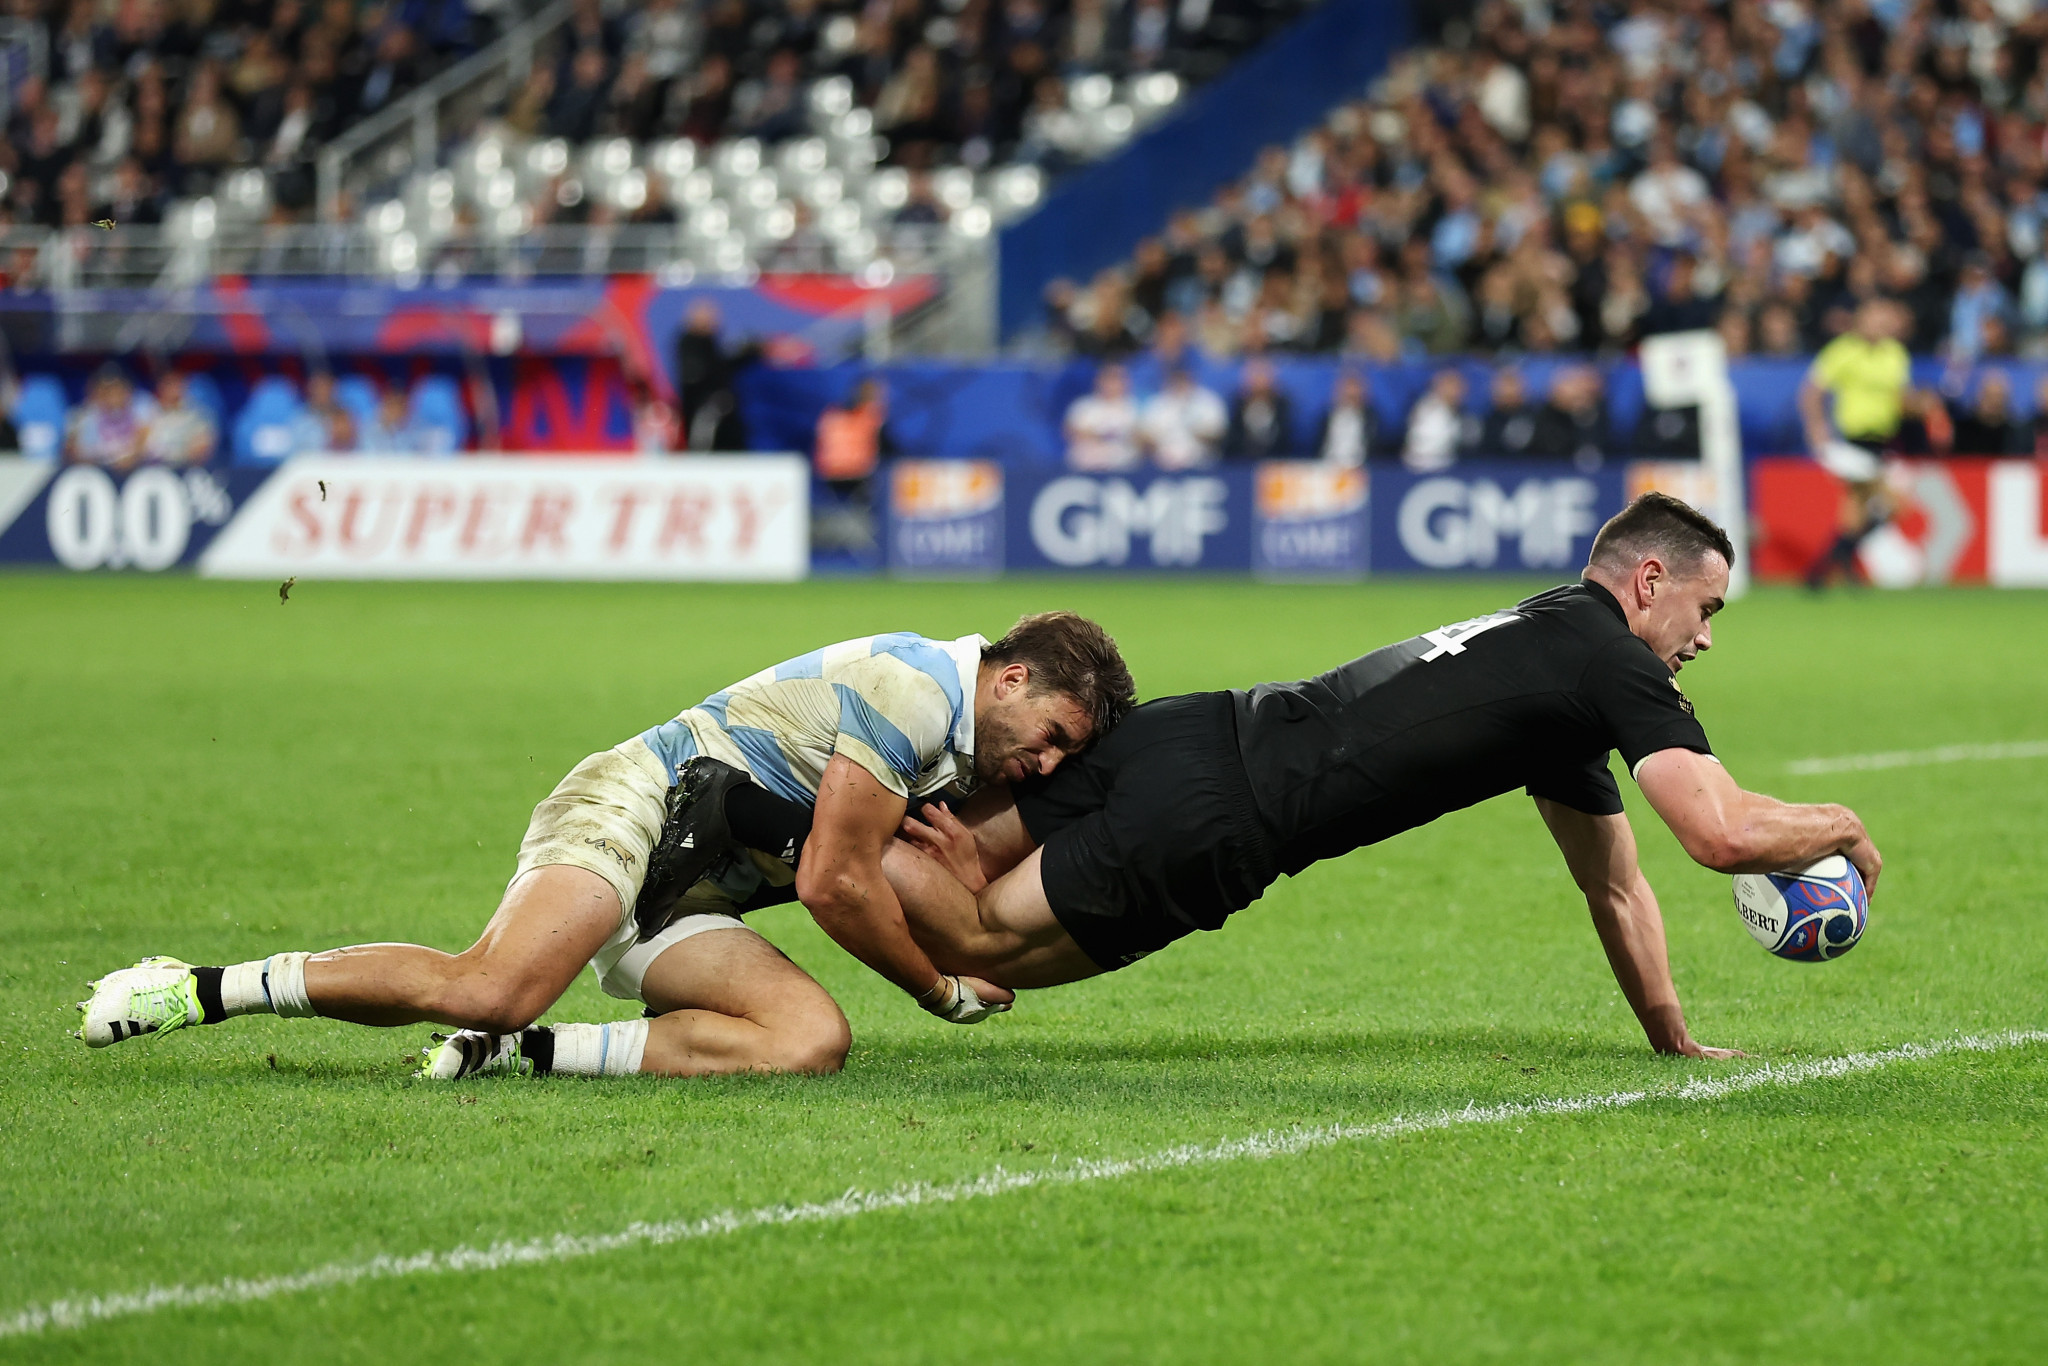 Will Jordan, right, scored the first try as New Zealand demolished Argentina 44-6 on Friday ©Getty Images
